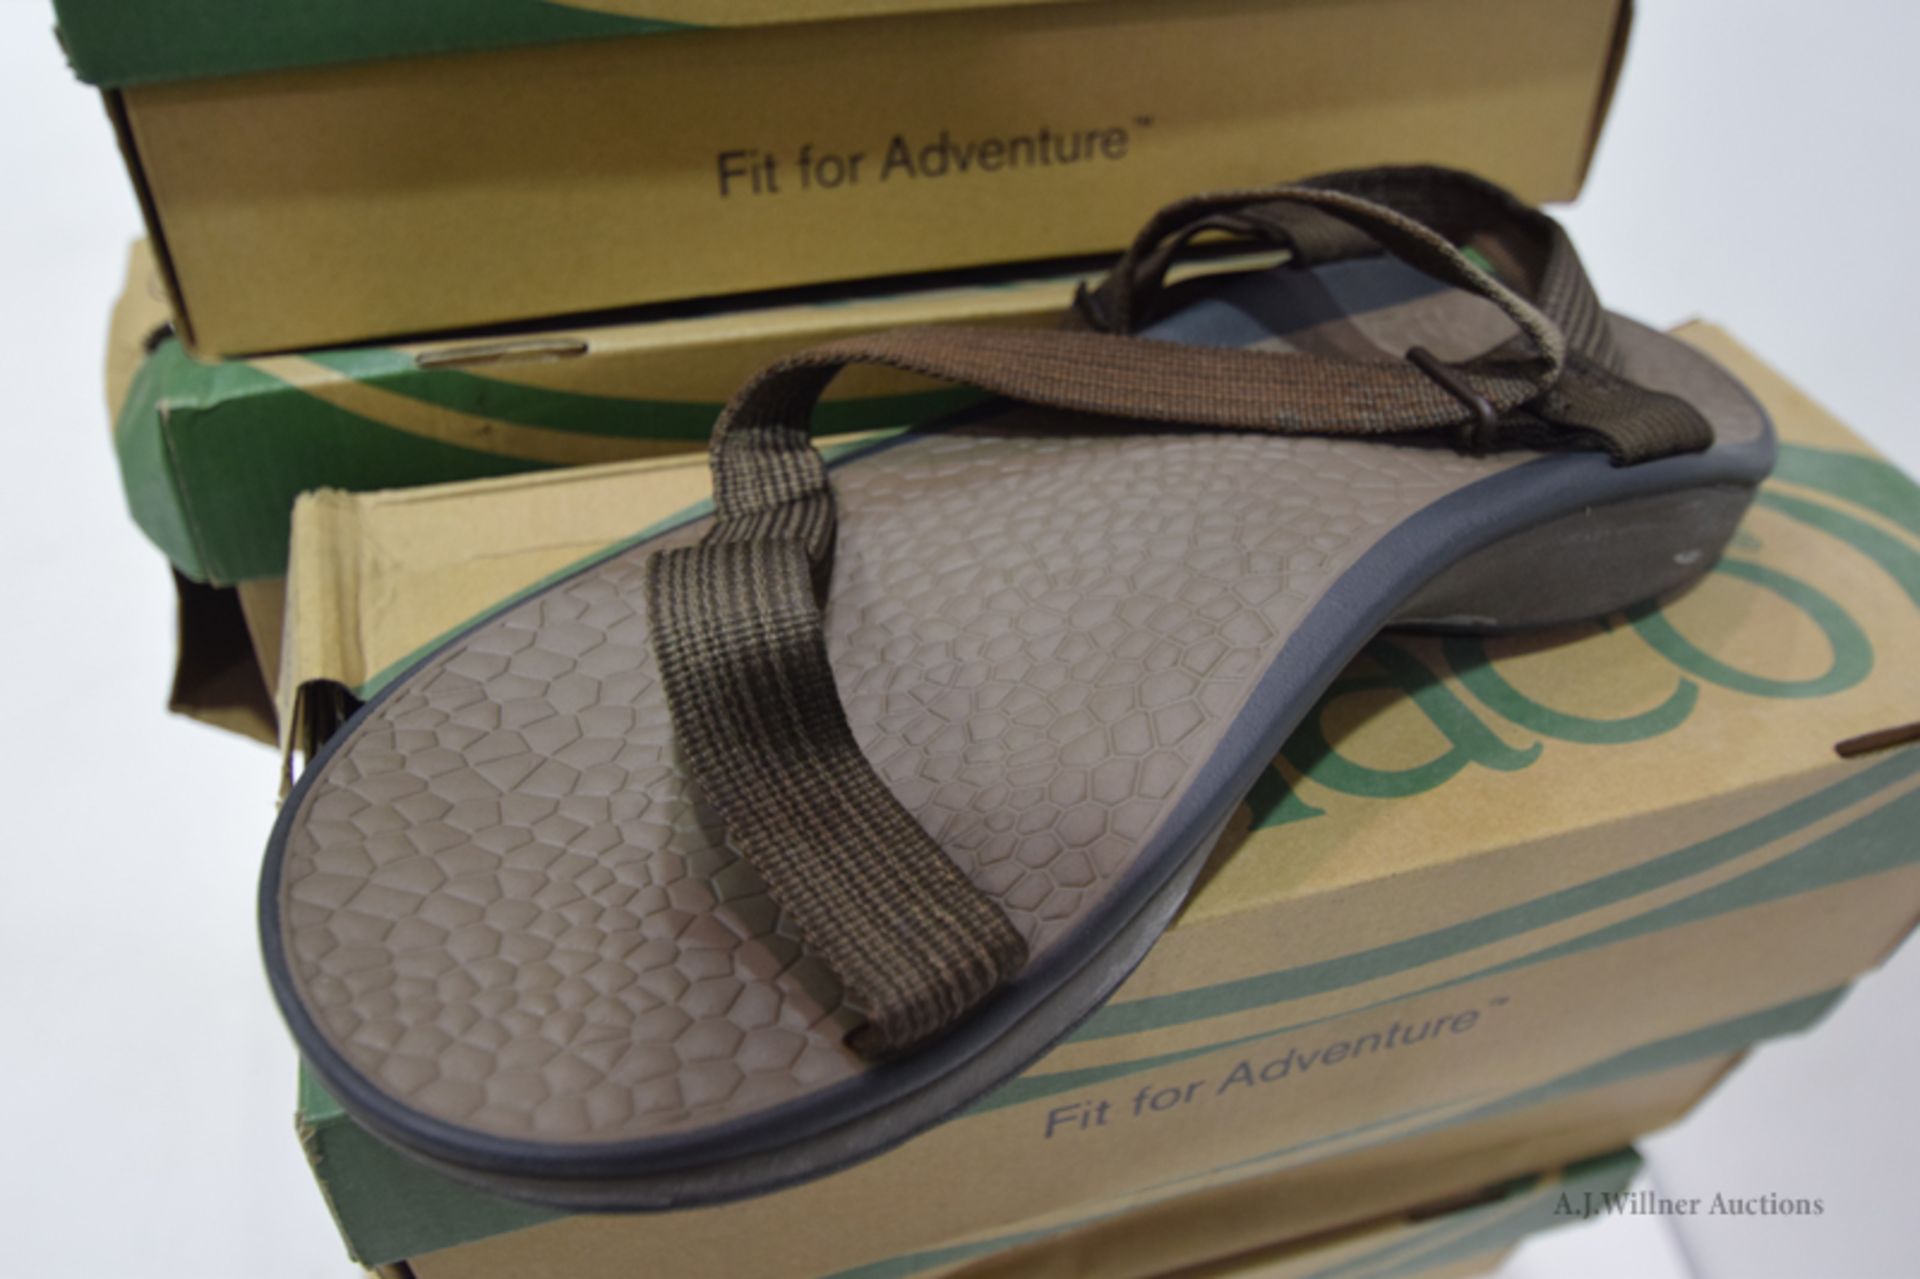 Chaco Footwear - Image 2 of 7